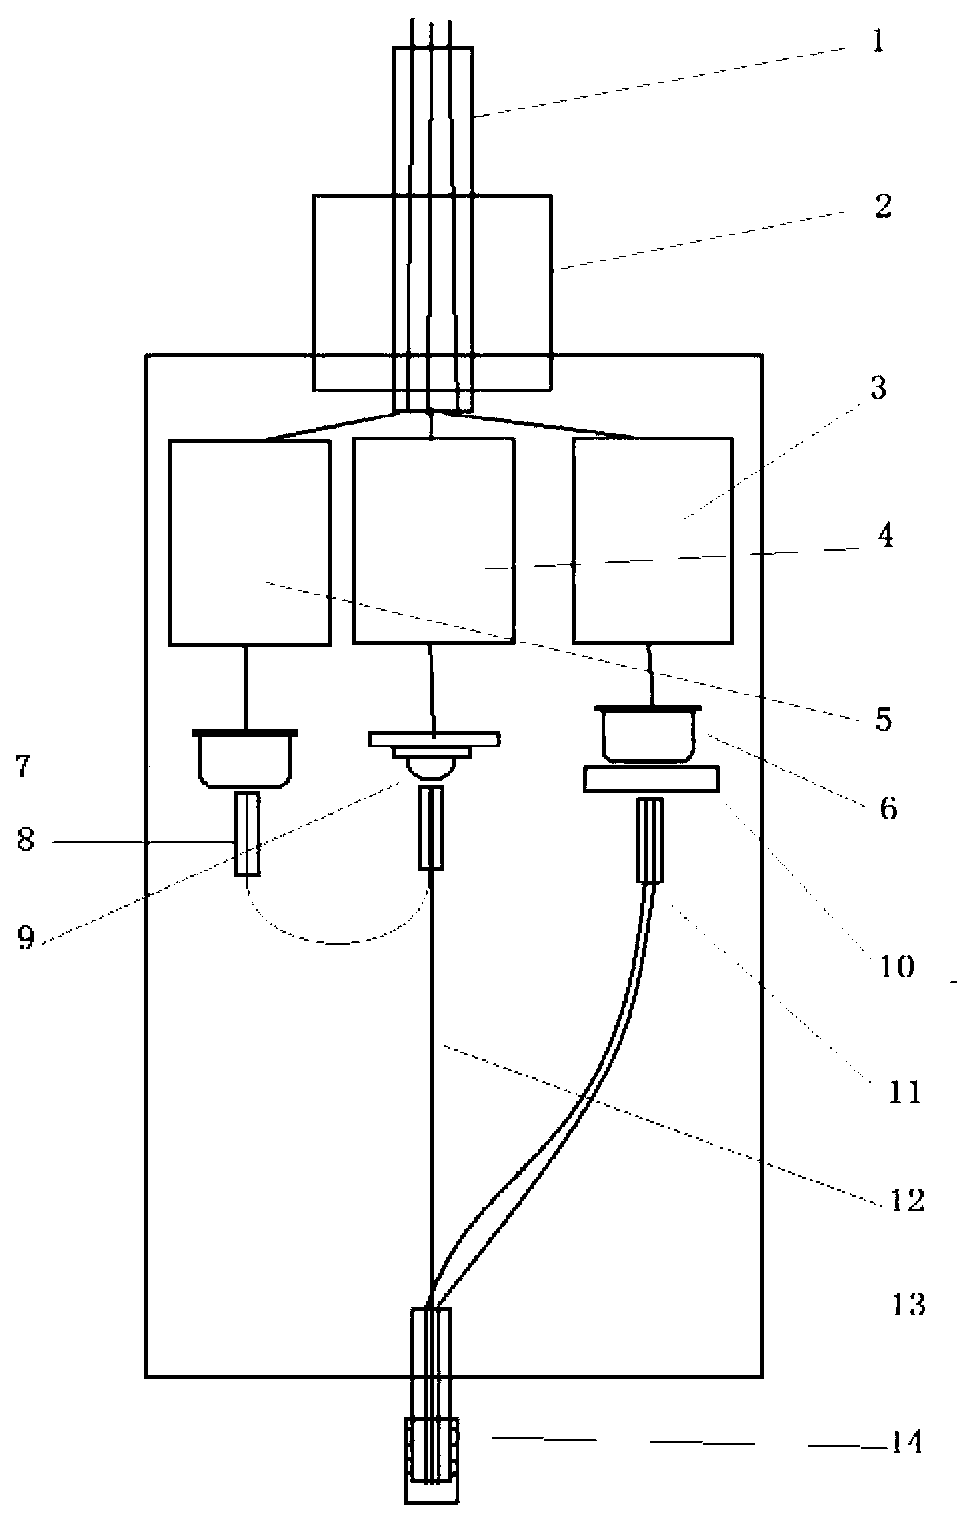 Dissolved oxygen online monitoring method and adopted sensor